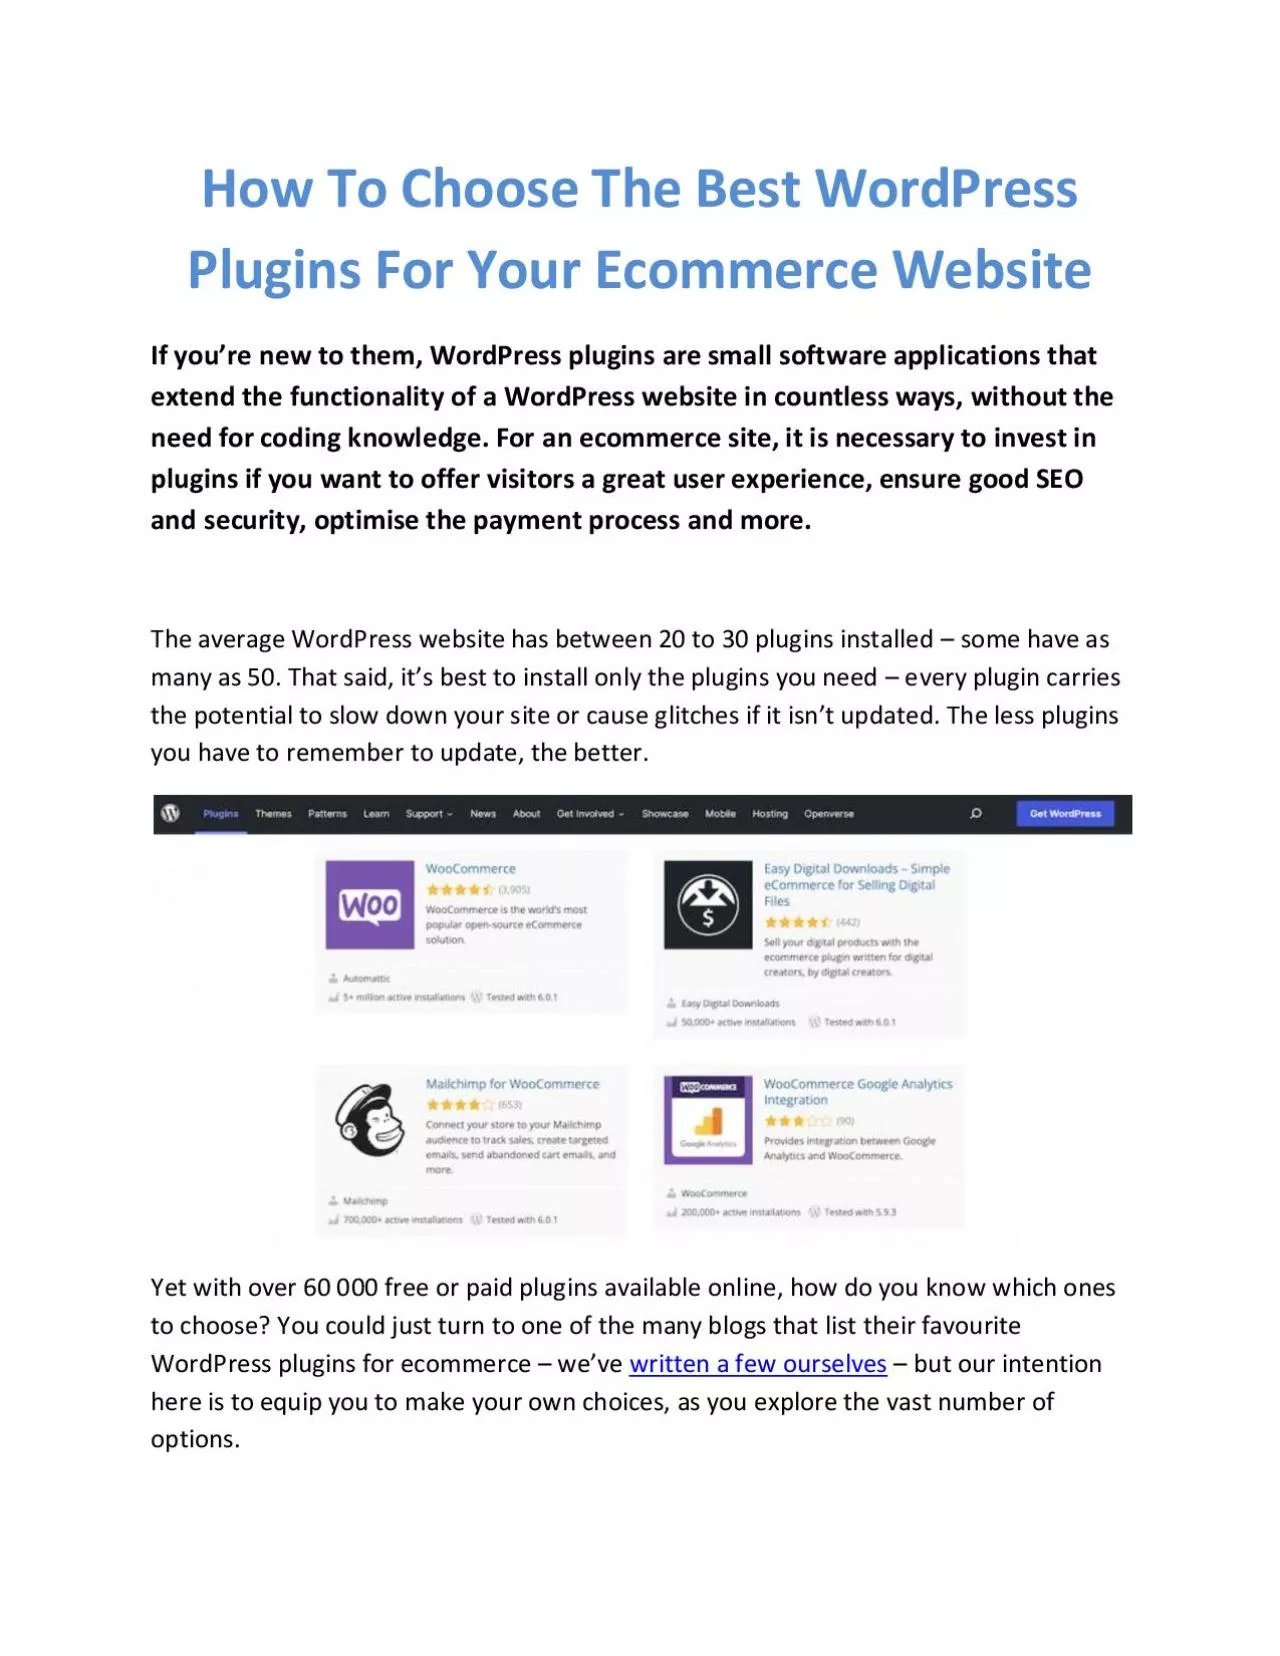 How To Choose The Best WordPress Plugins For Your Ecommerce Website